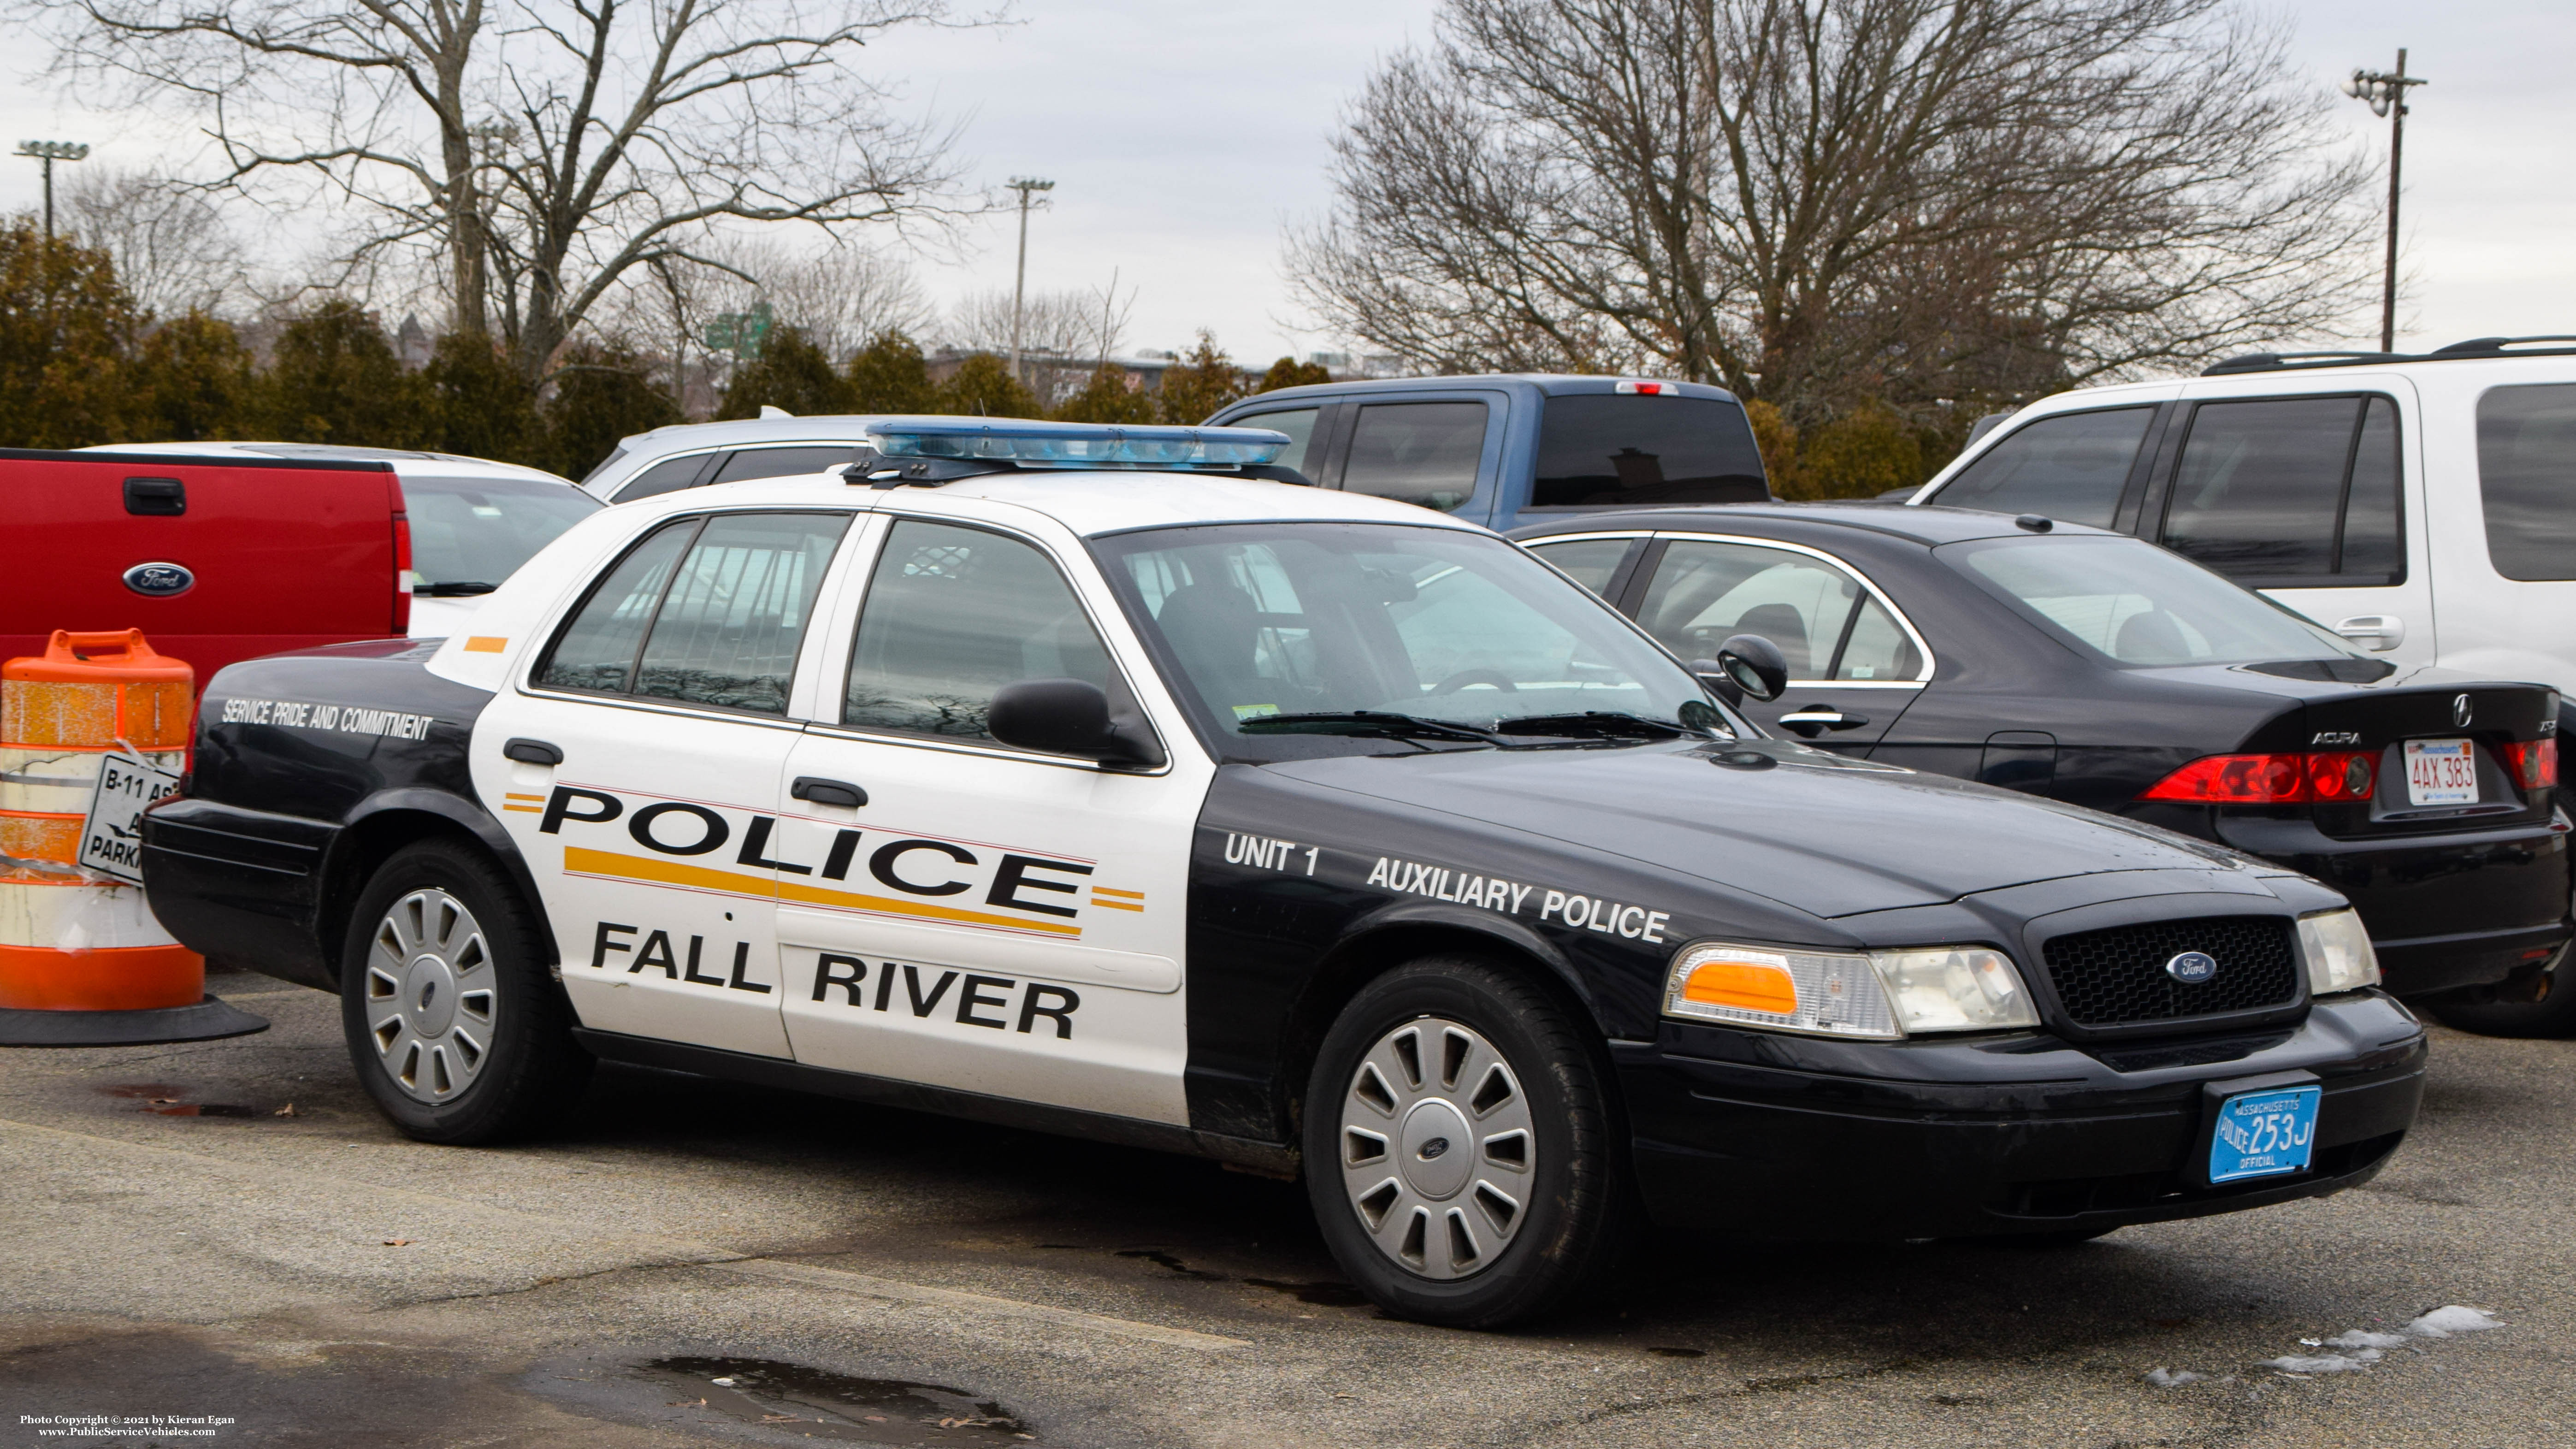 A photo  of Fall River Police
            Auxiliary Police Unit 1, a 2008 Ford Crown Victoria Police Interceptor             taken by Kieran Egan